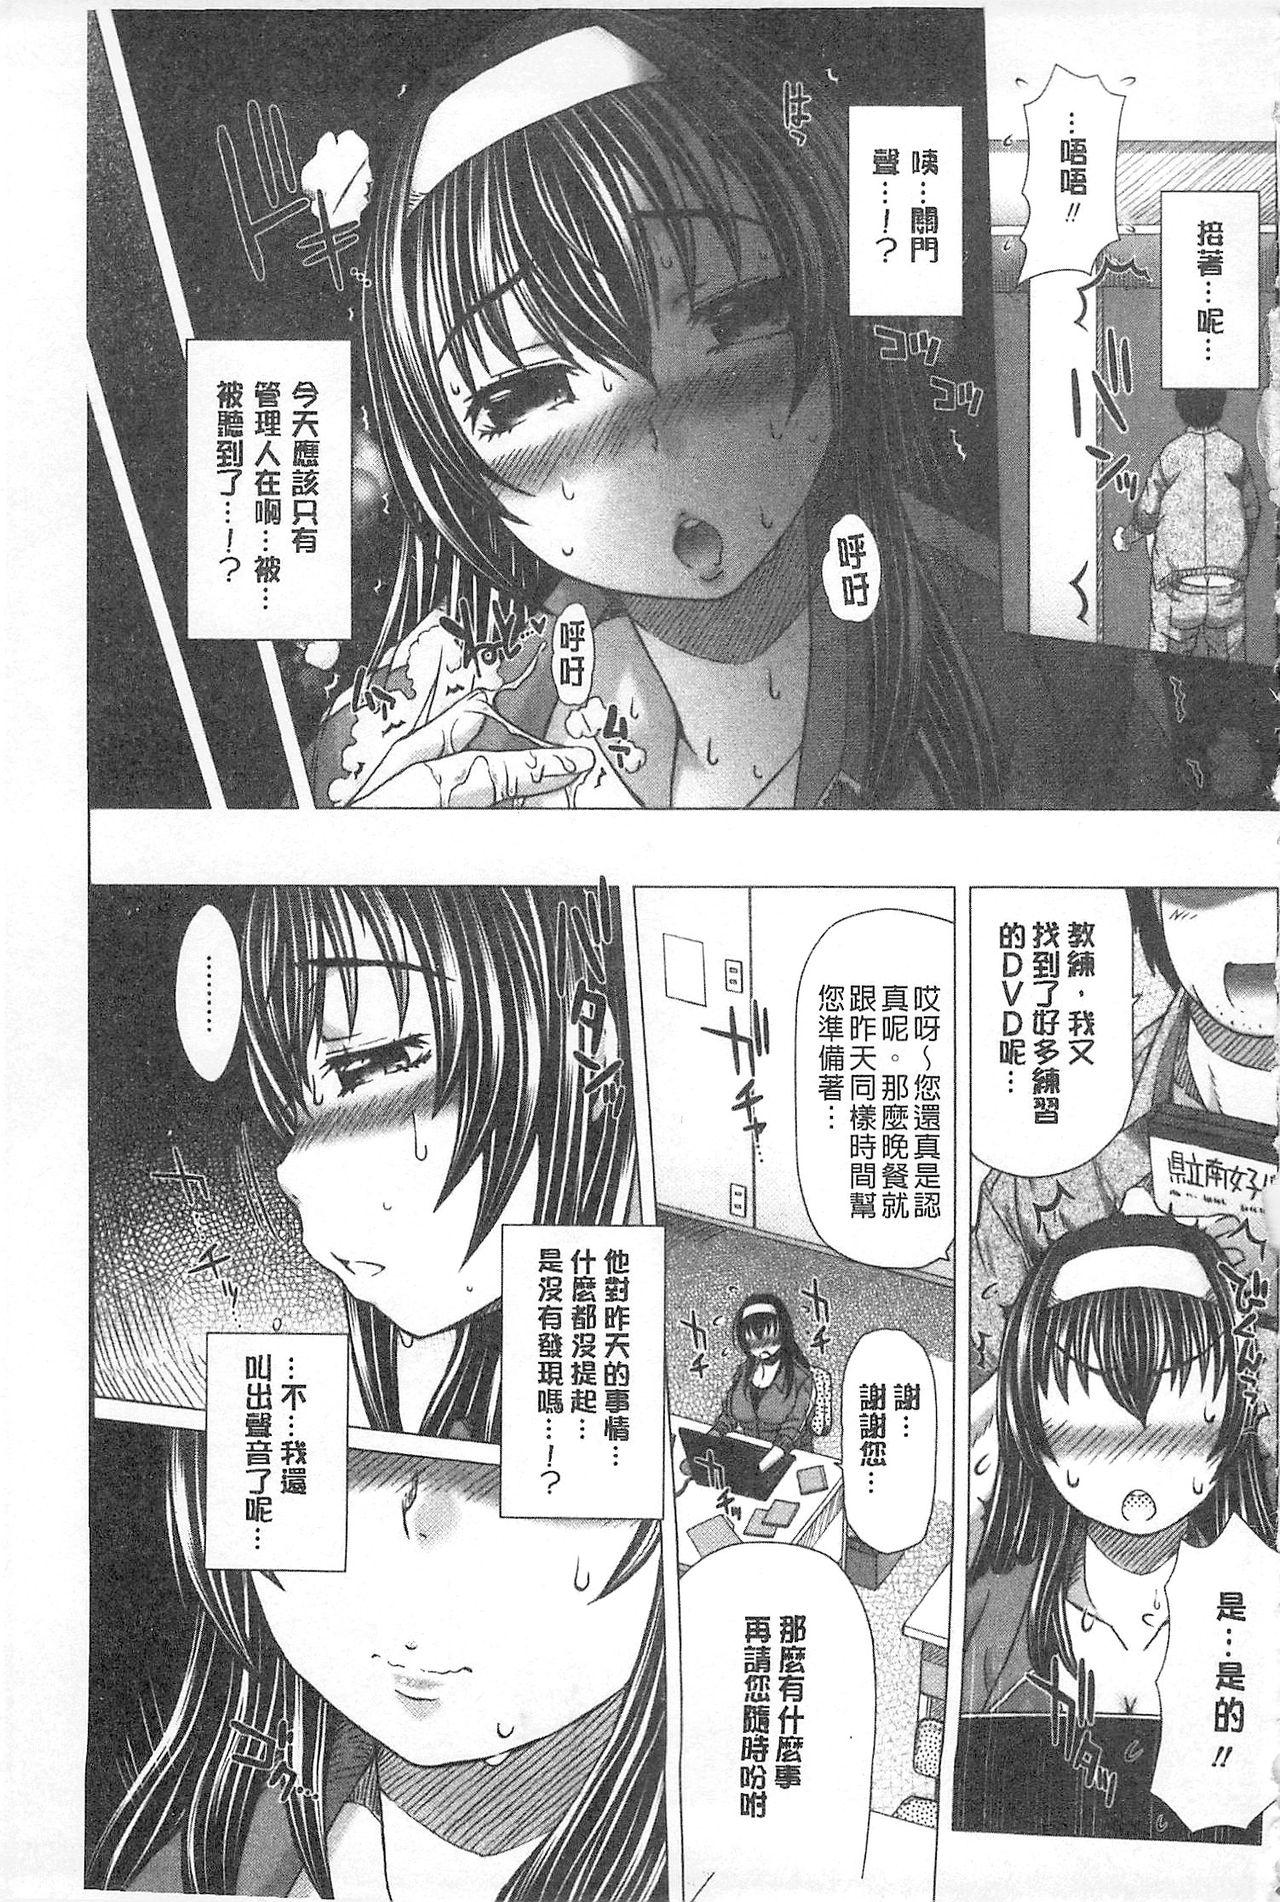 For Kanojo no Ana. | 彼女之穴 Muscle - Page 8